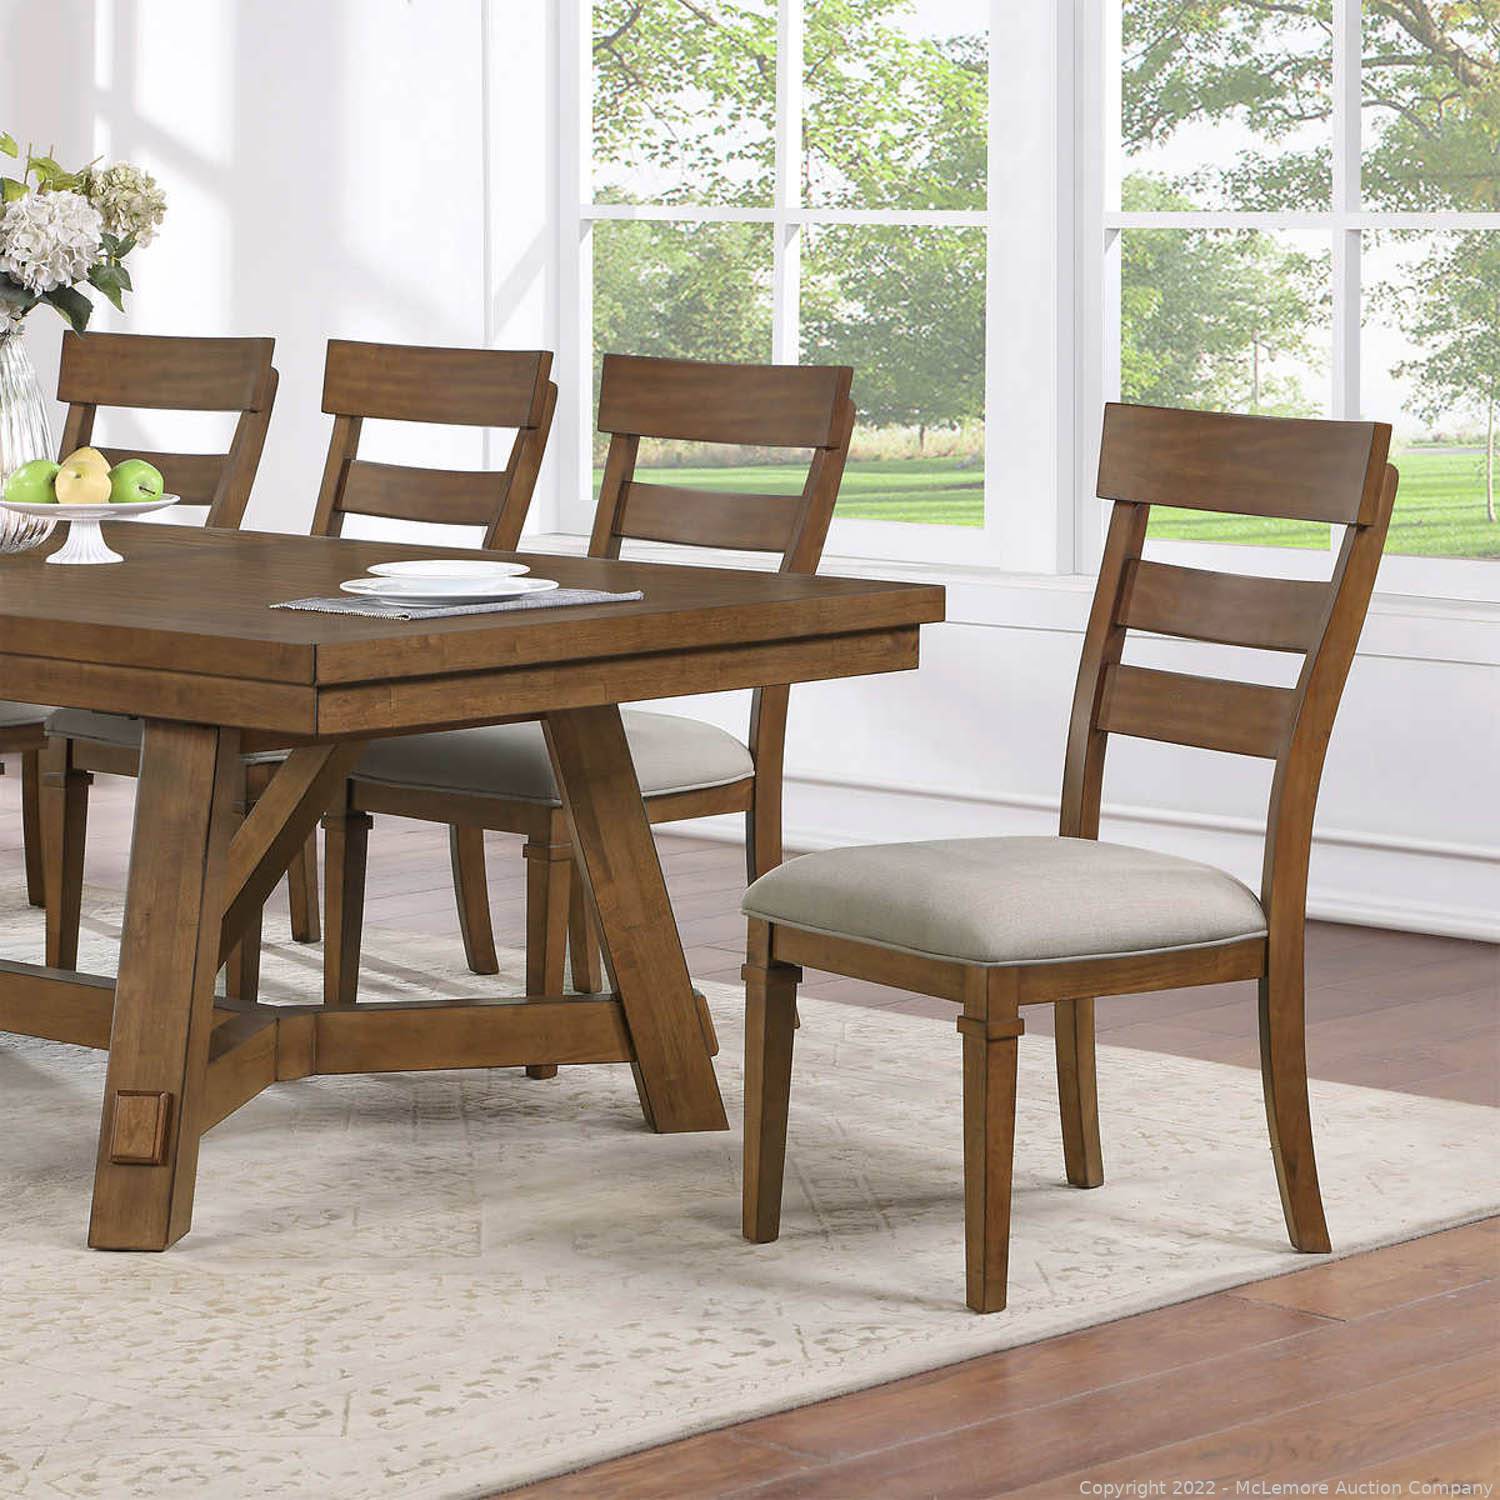 Brantley 9-piece Dining Table Set